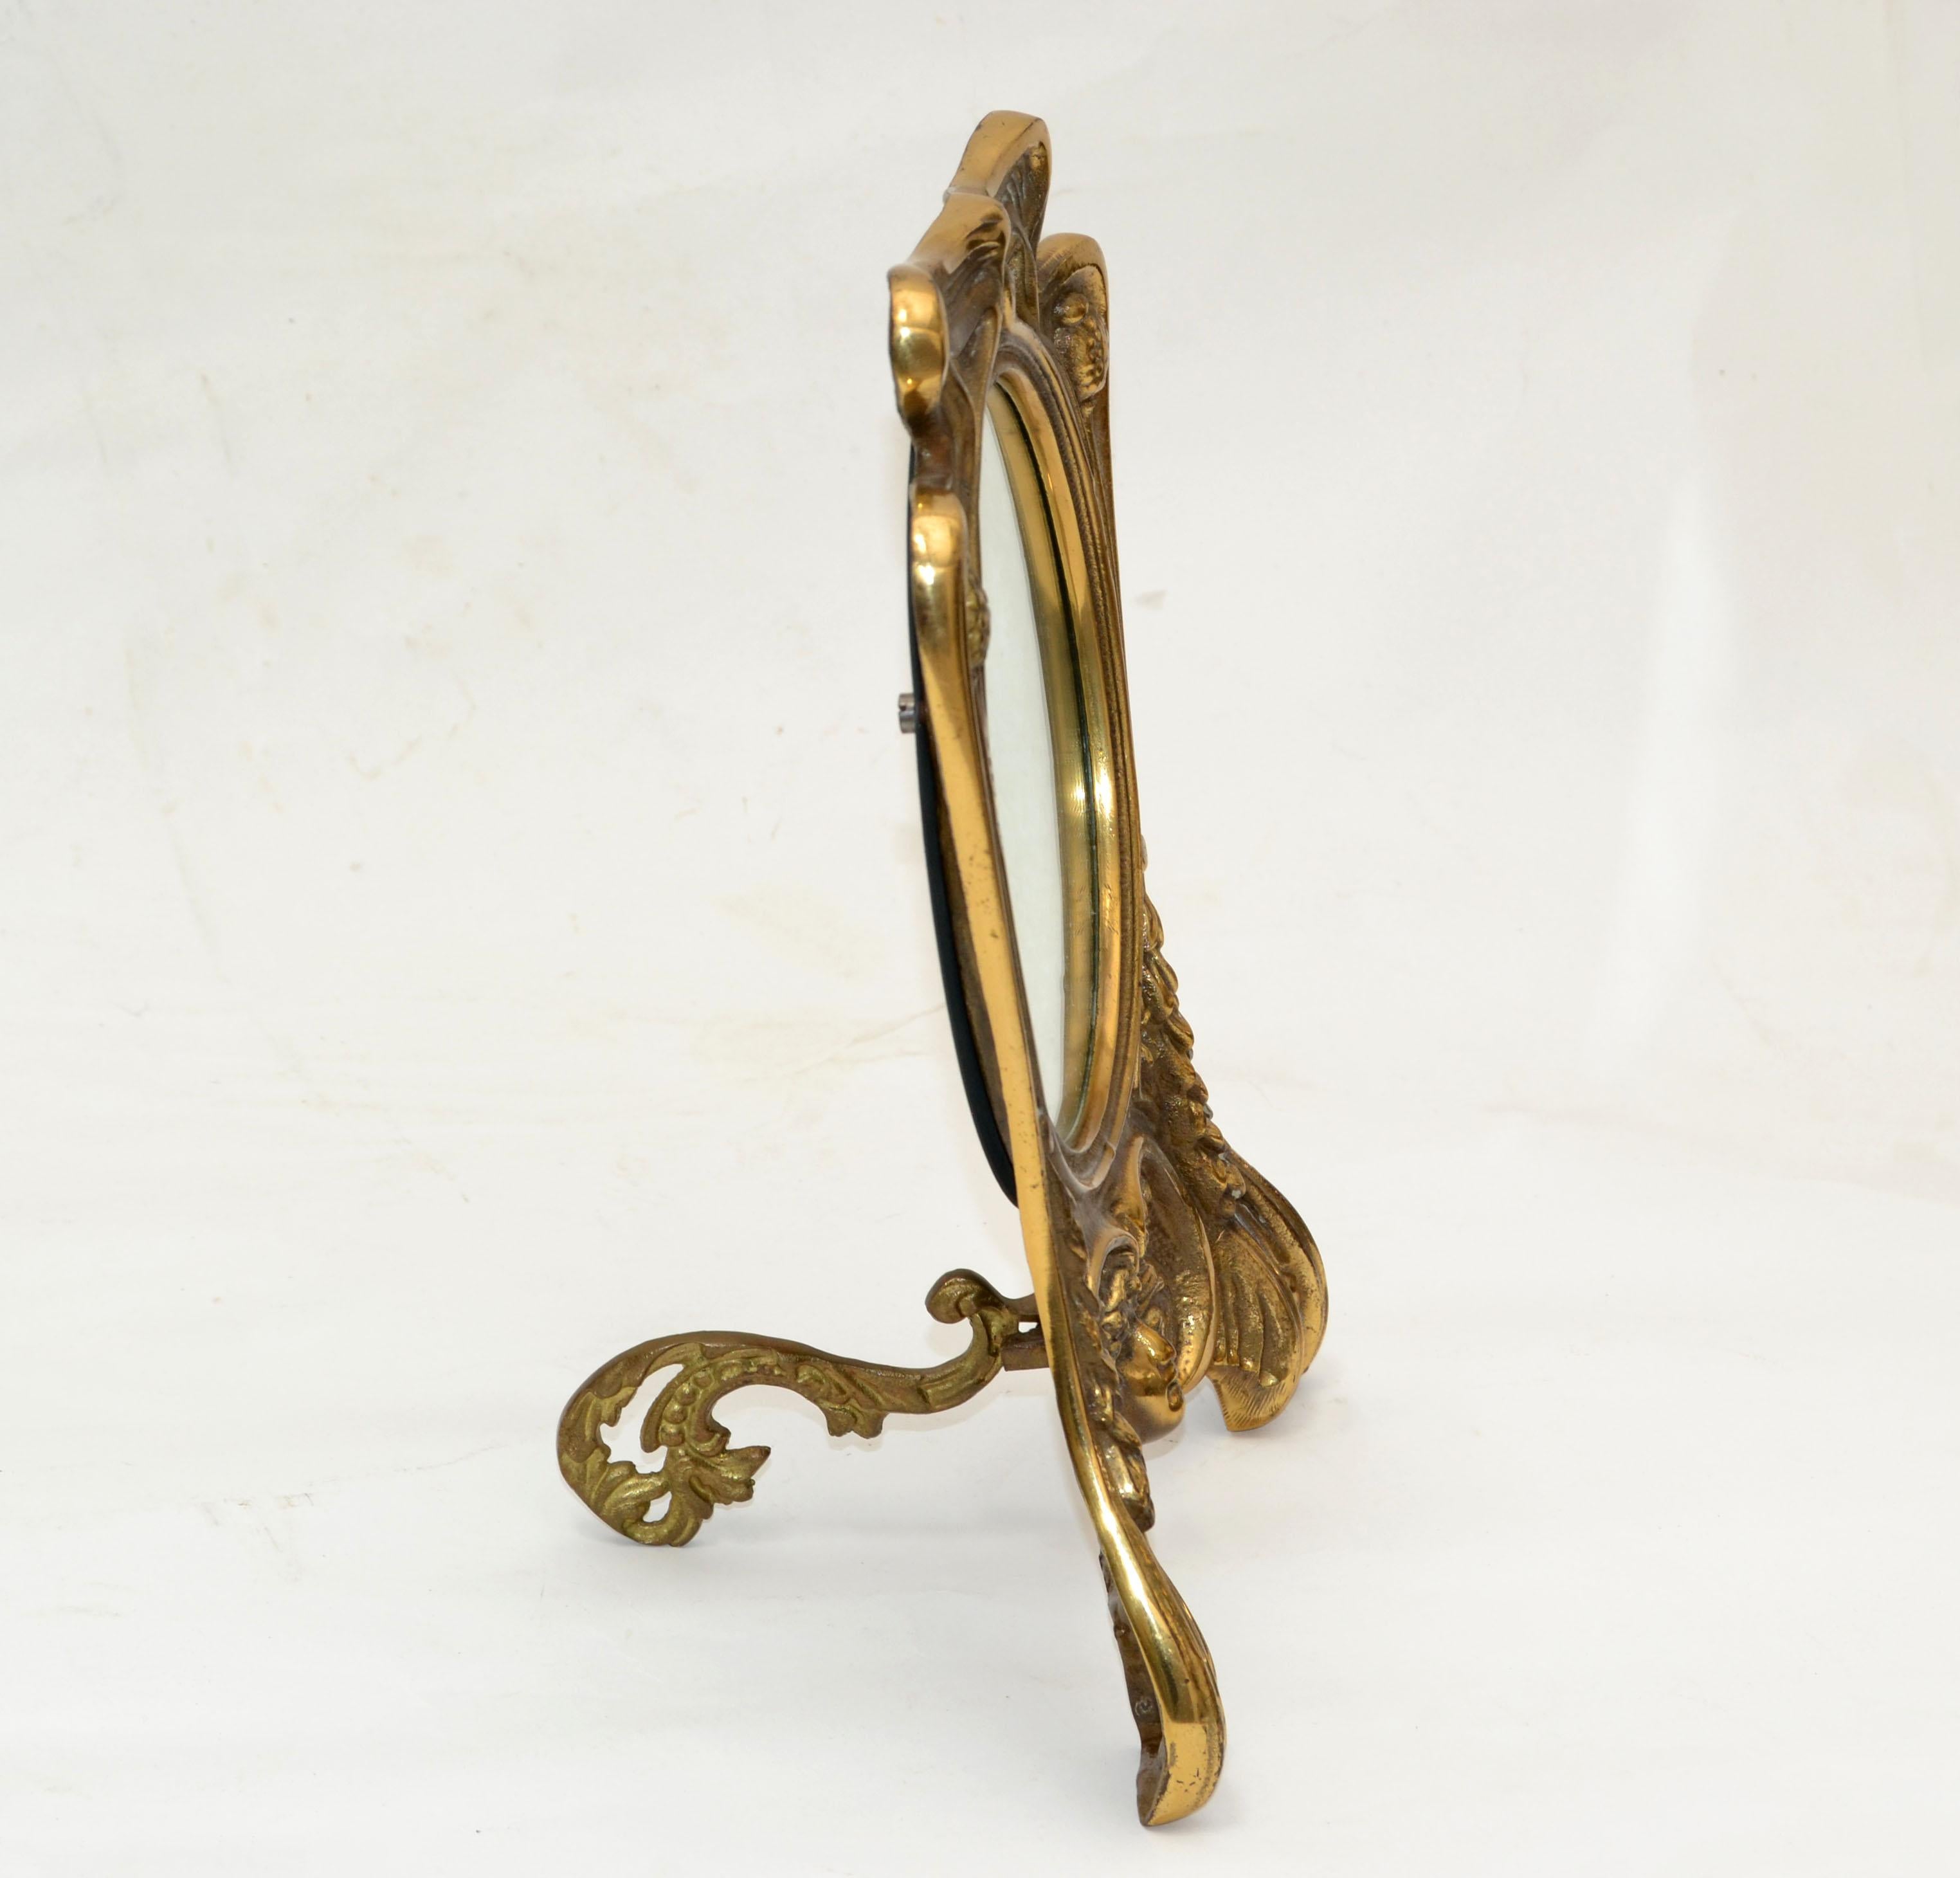 American Art Nouveau Whimsical Handcrafted Golden Bronze Table Mirror Vanity Mirror 1940 For Sale